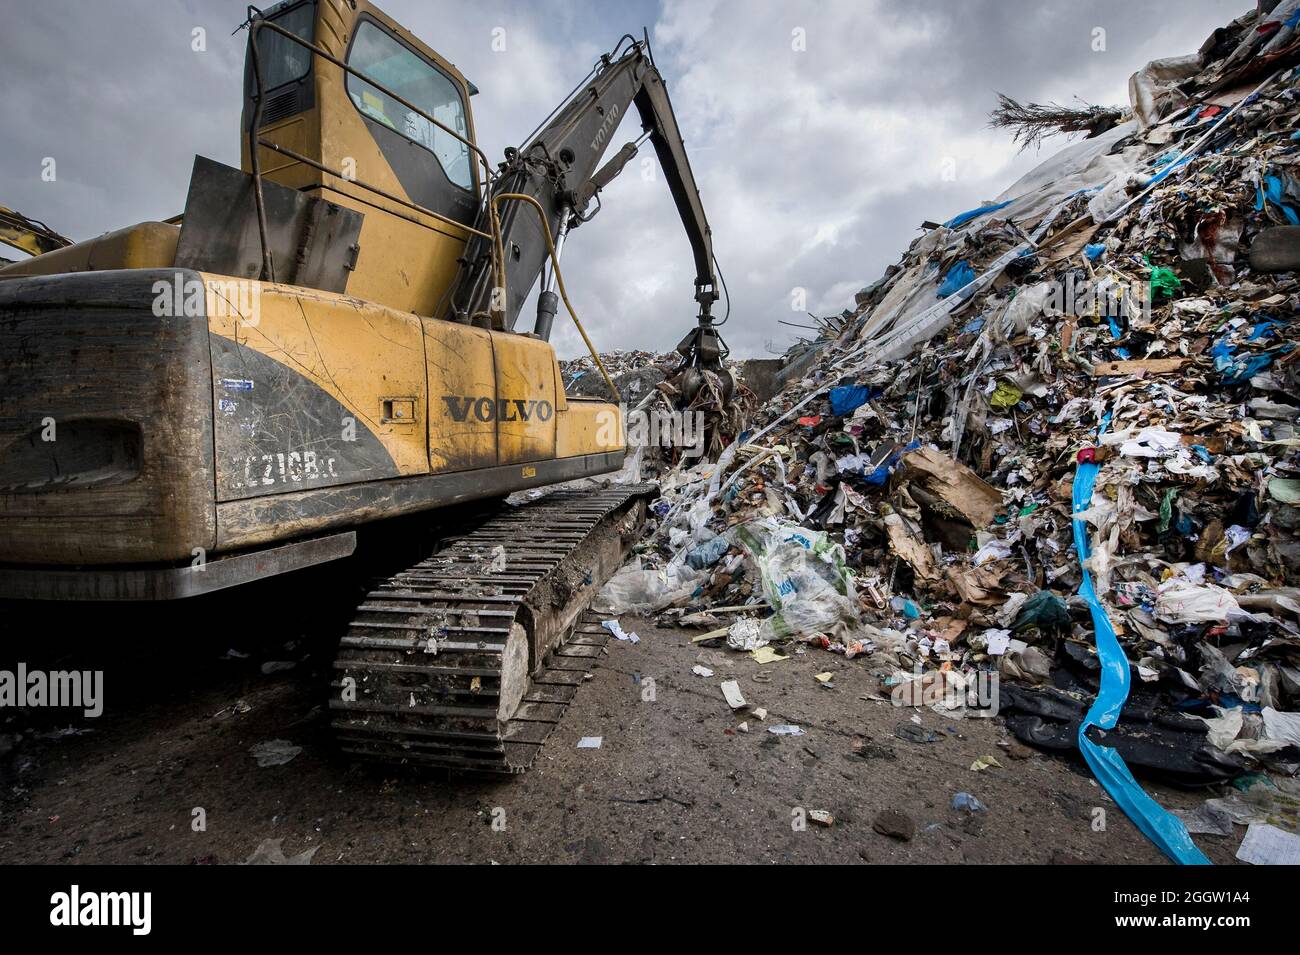 Volvo crawler excavator working at a materials recycling facility in the UK. Stock Photo